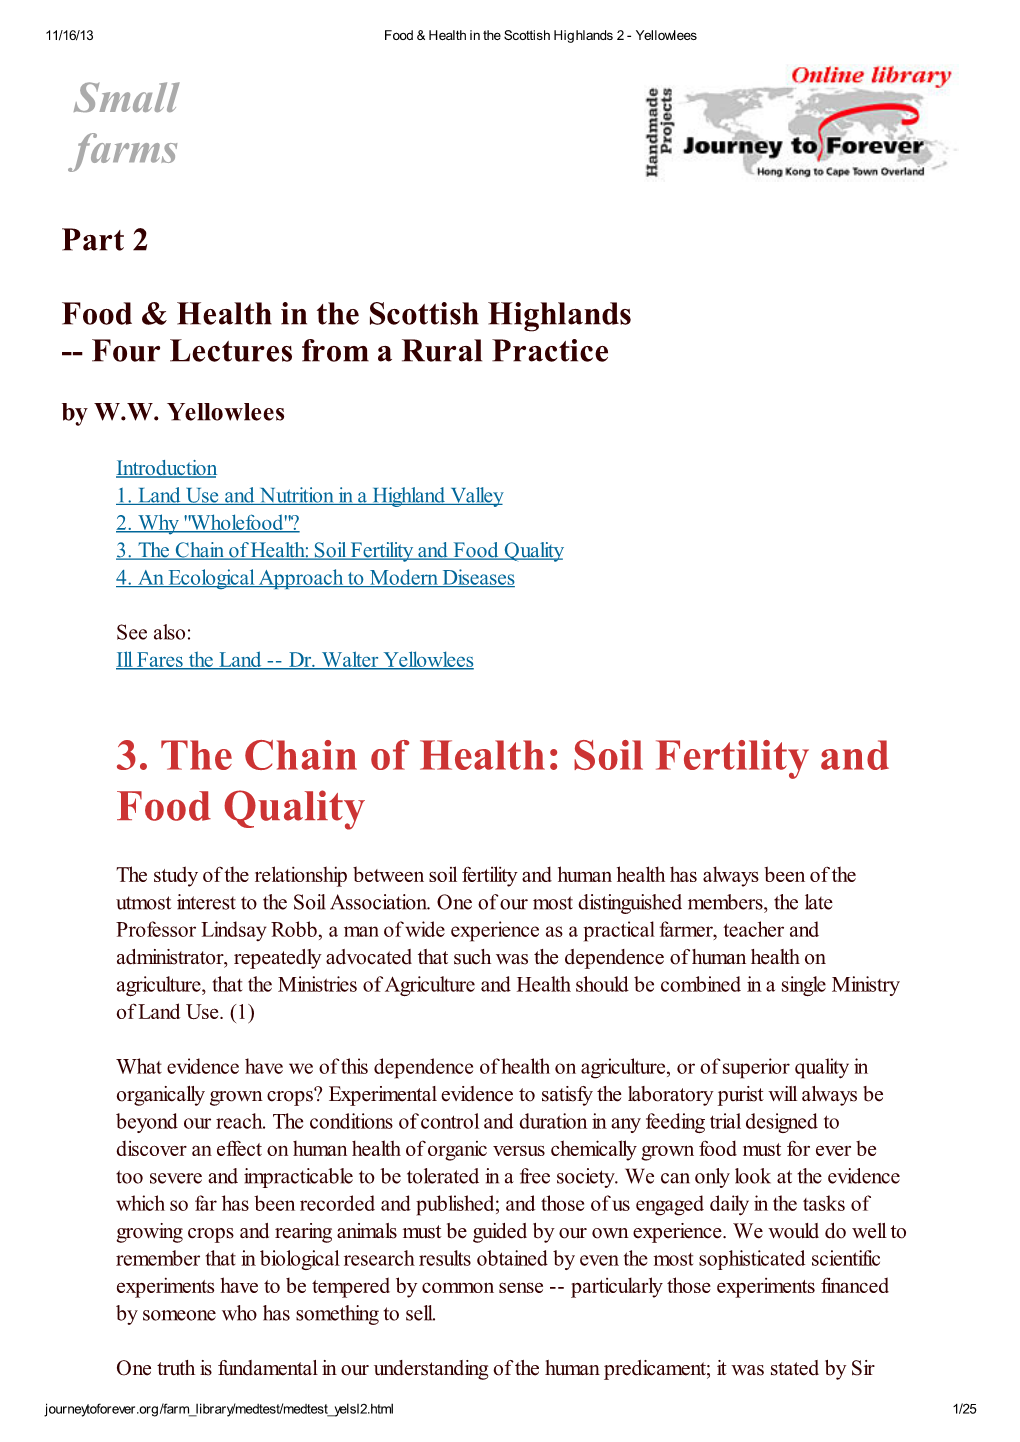 Small Farms 3. the Chain of Health: Soil Fertility and Food Quality